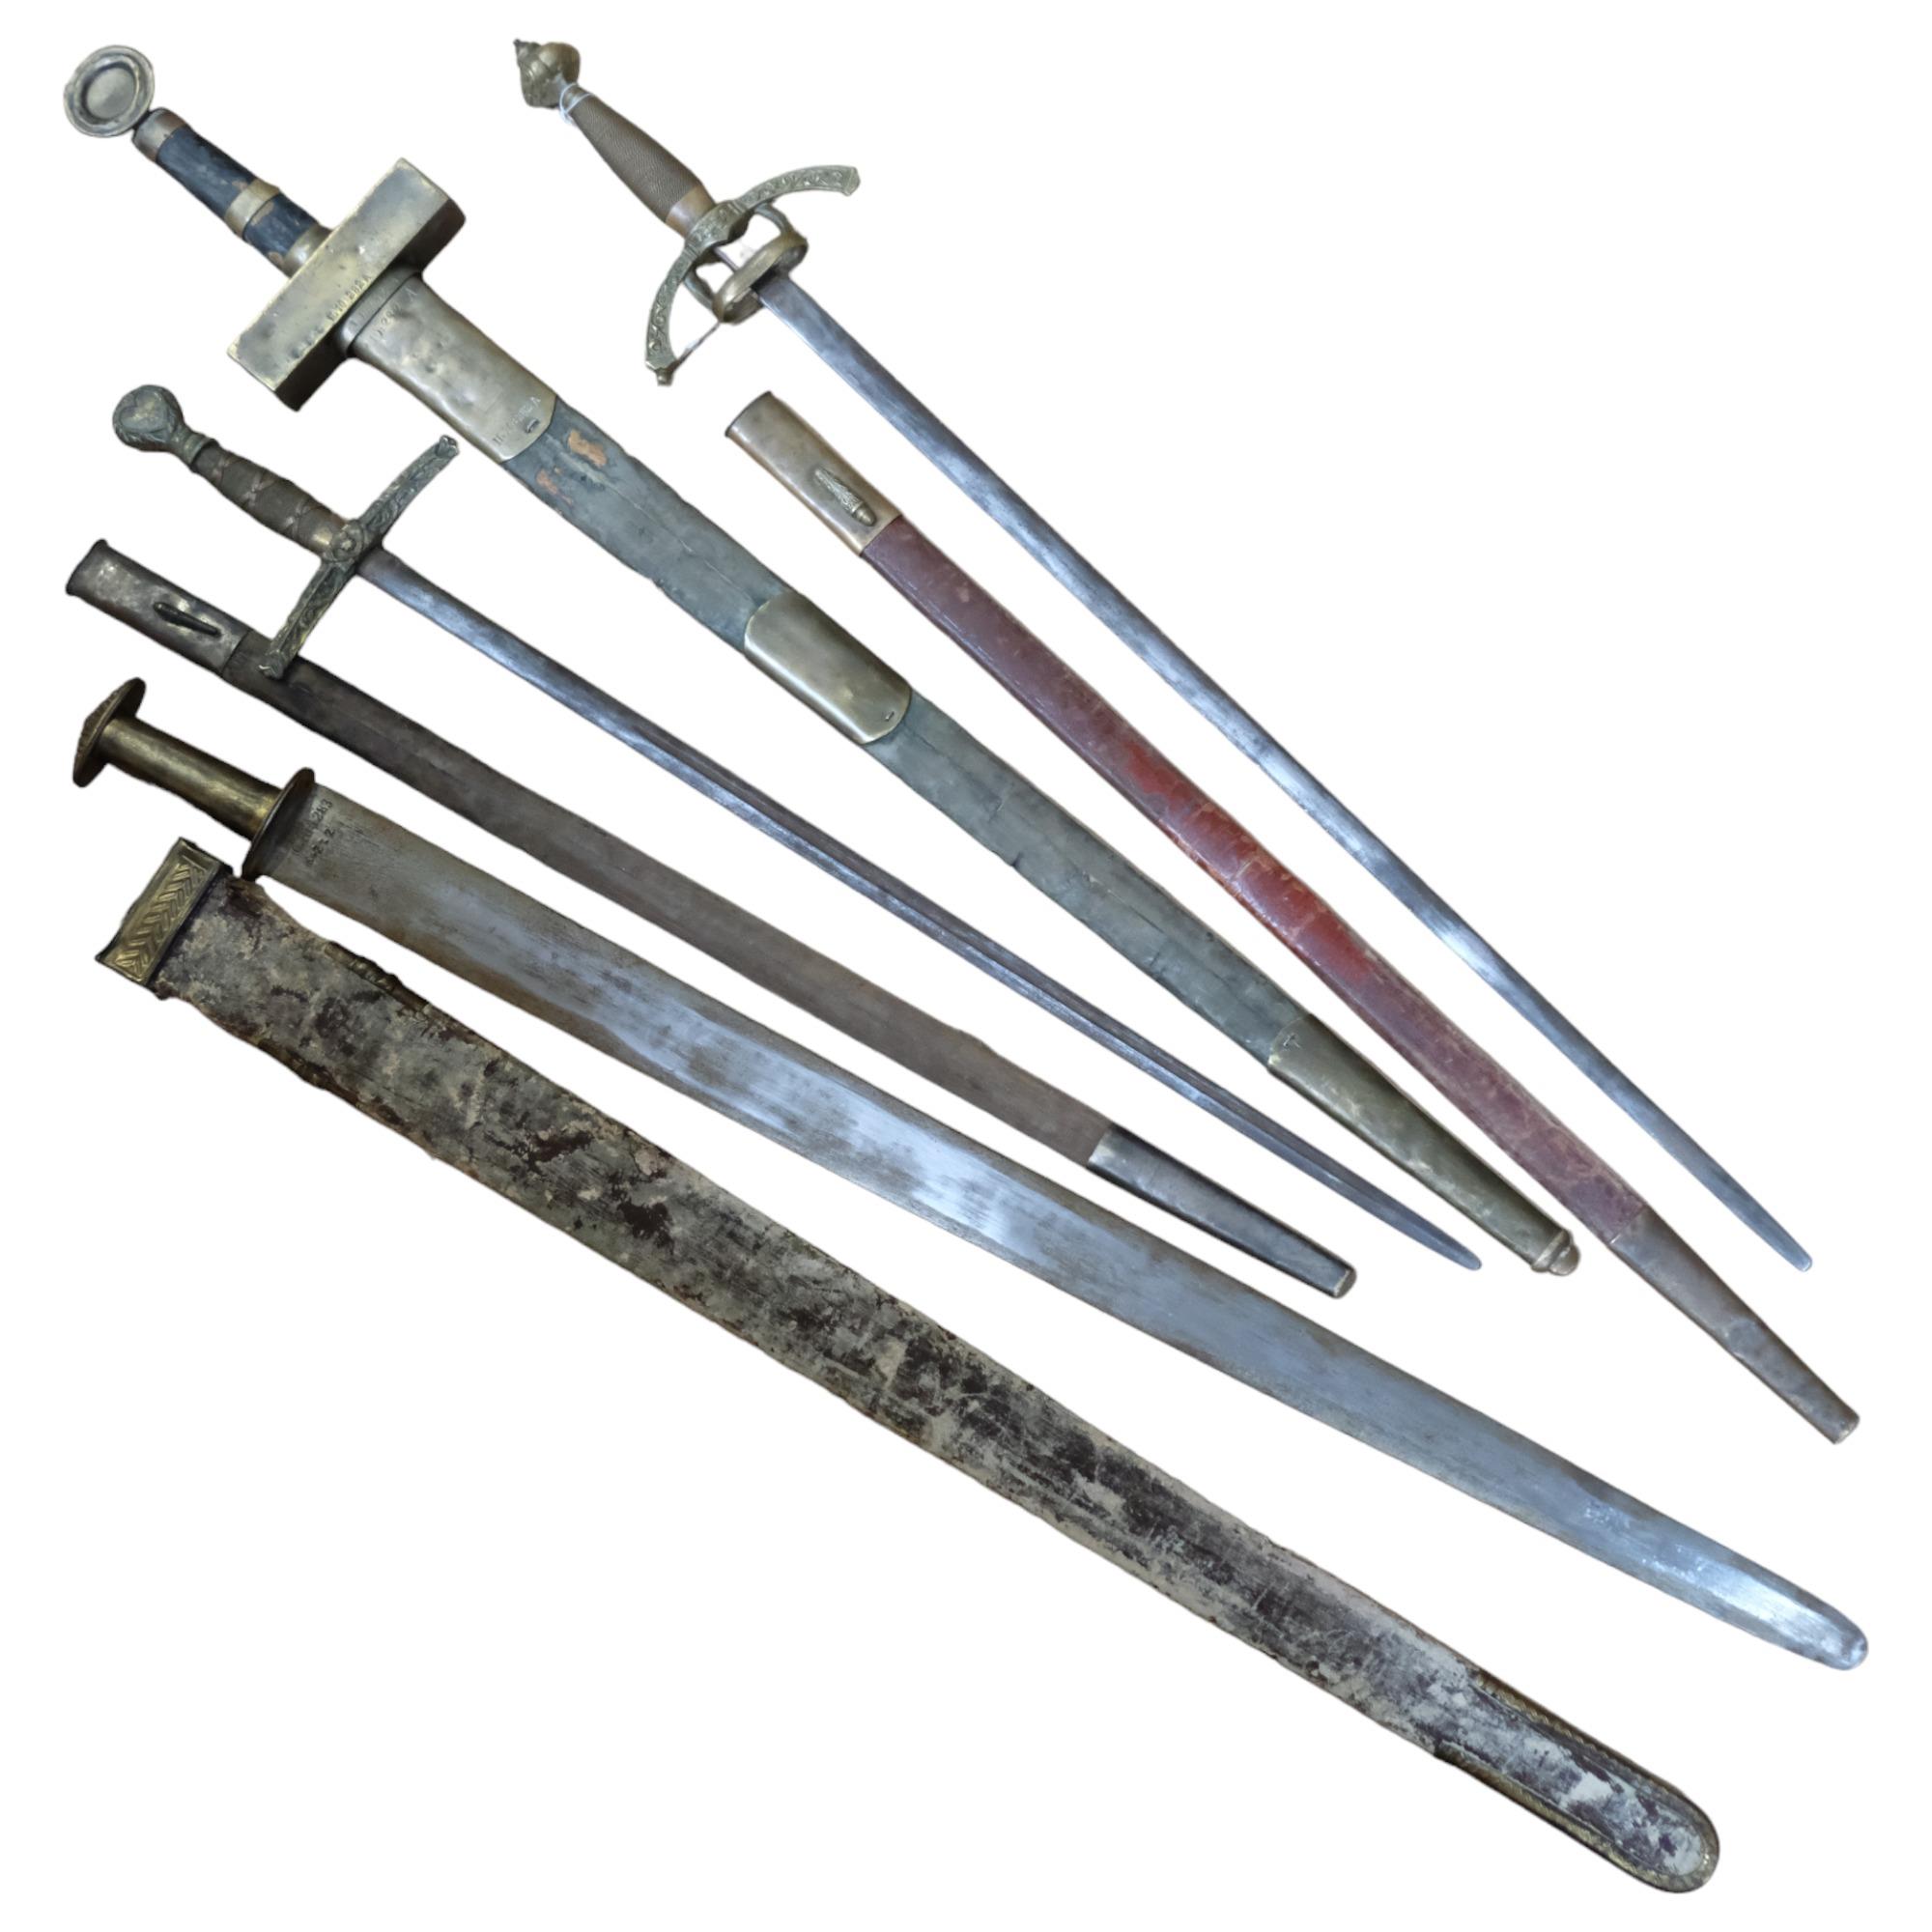 A group of 4 brass European re-enactment or reproduction swords, largest length 110cm